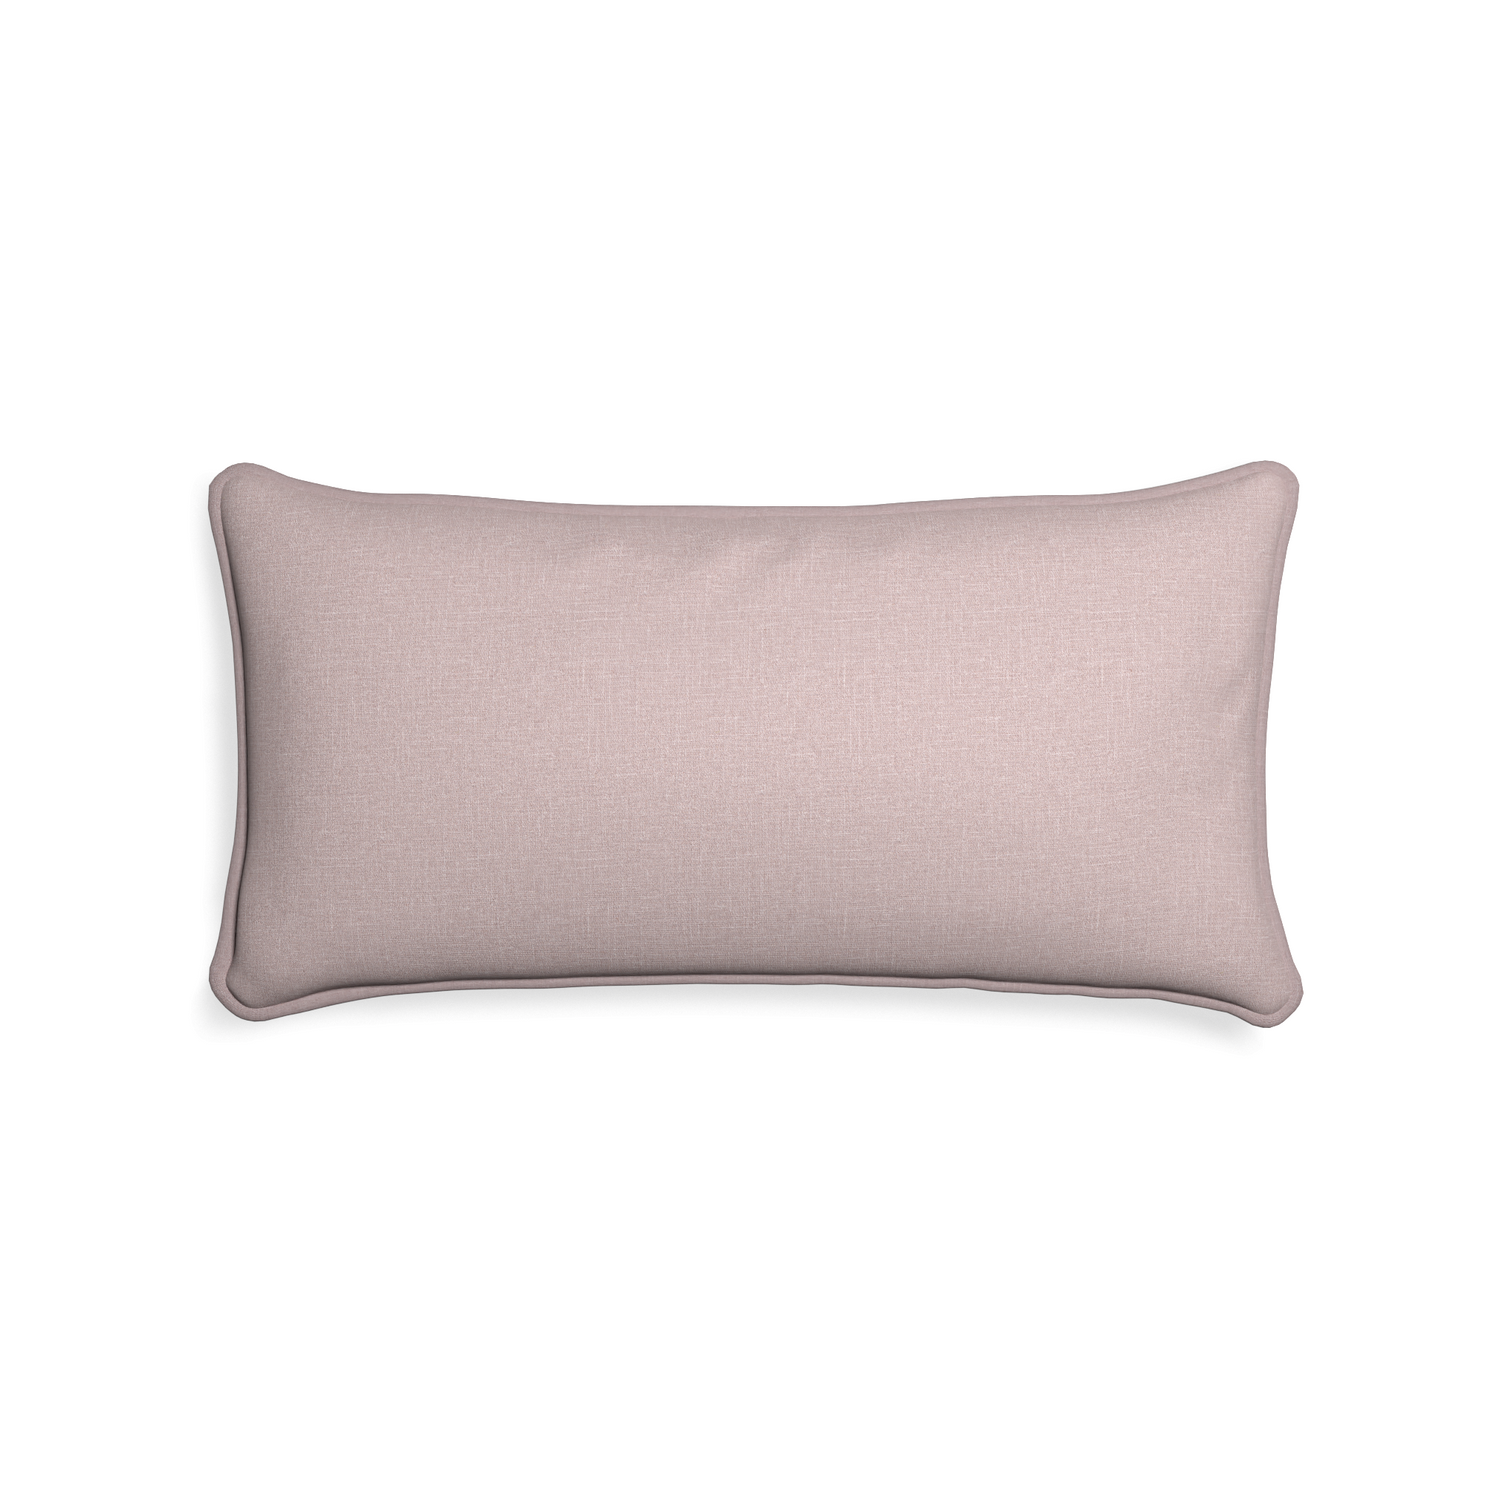 Midi-lumbar orchid custom mauve pinkpillow with orchid piping on white background